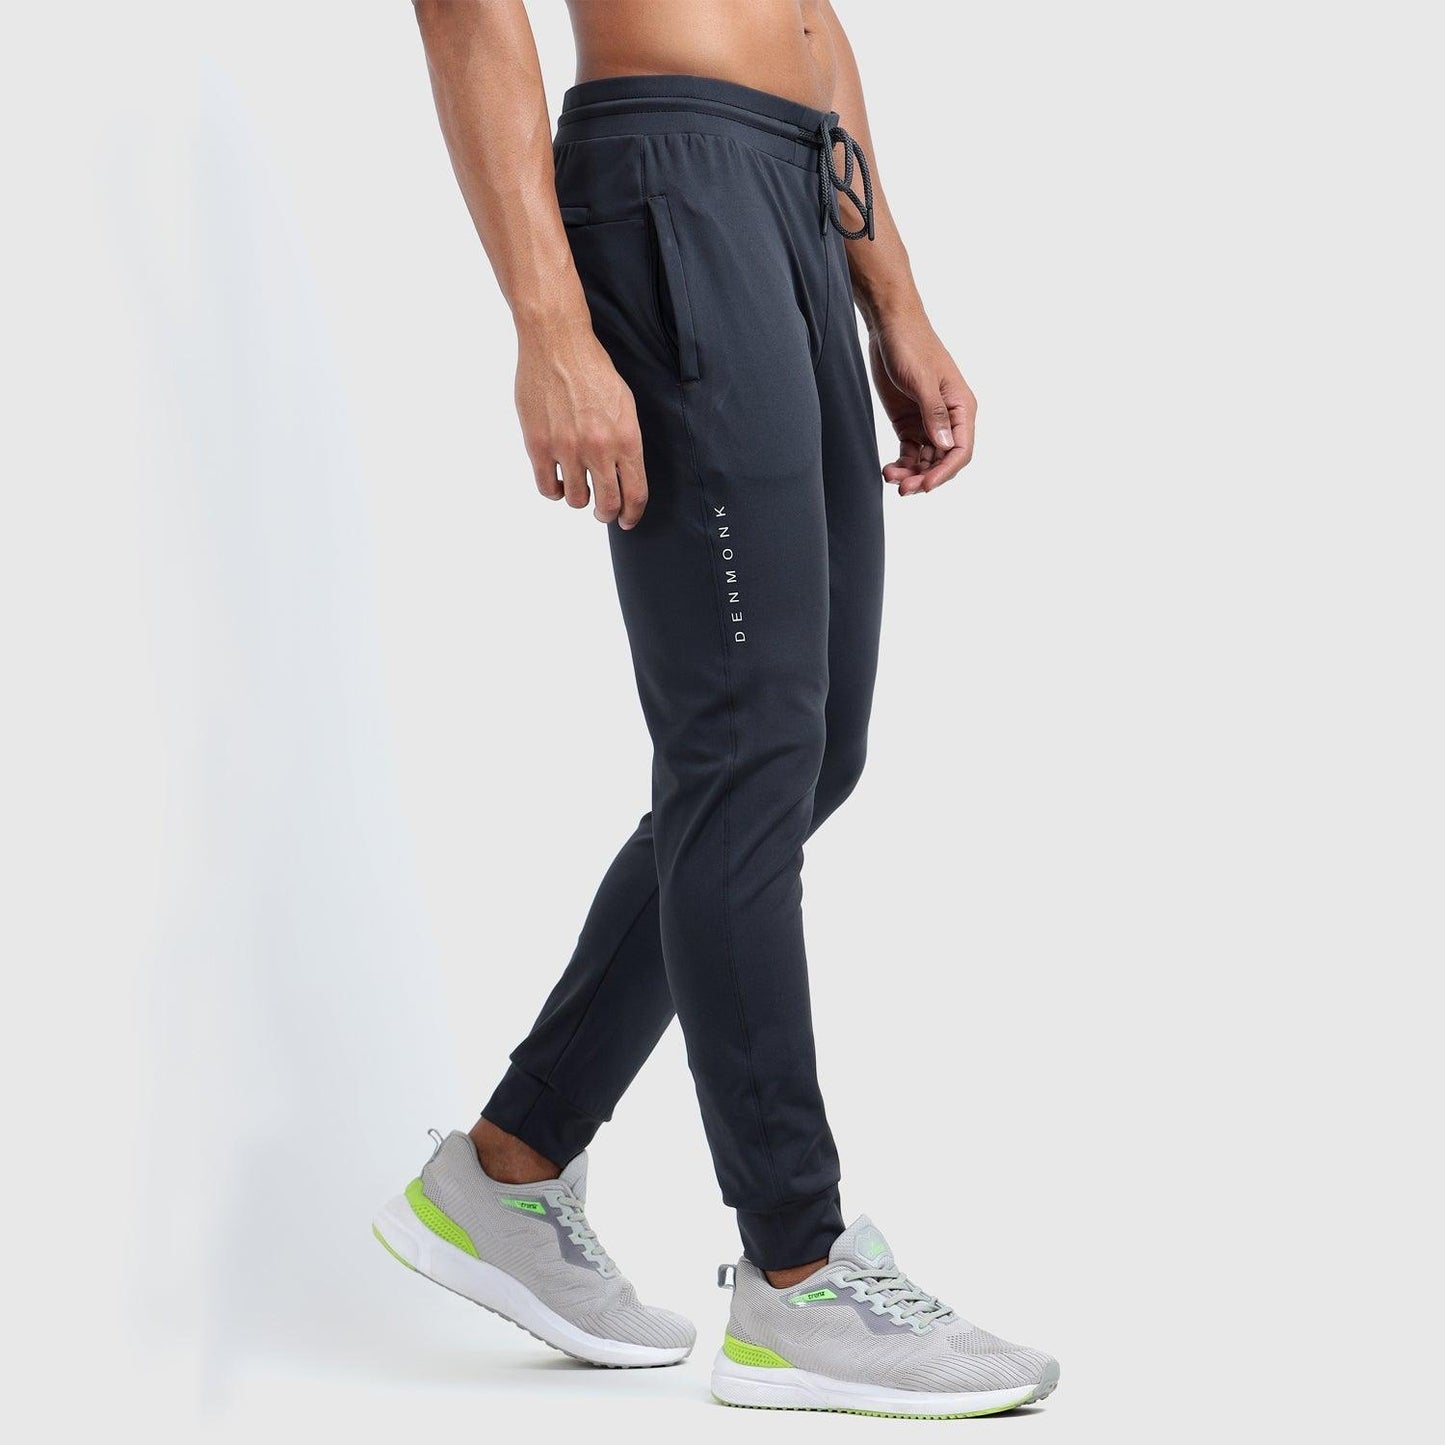 Denmonk: Elevate your look with these Power joggers sharp charcoal joggers for mens.